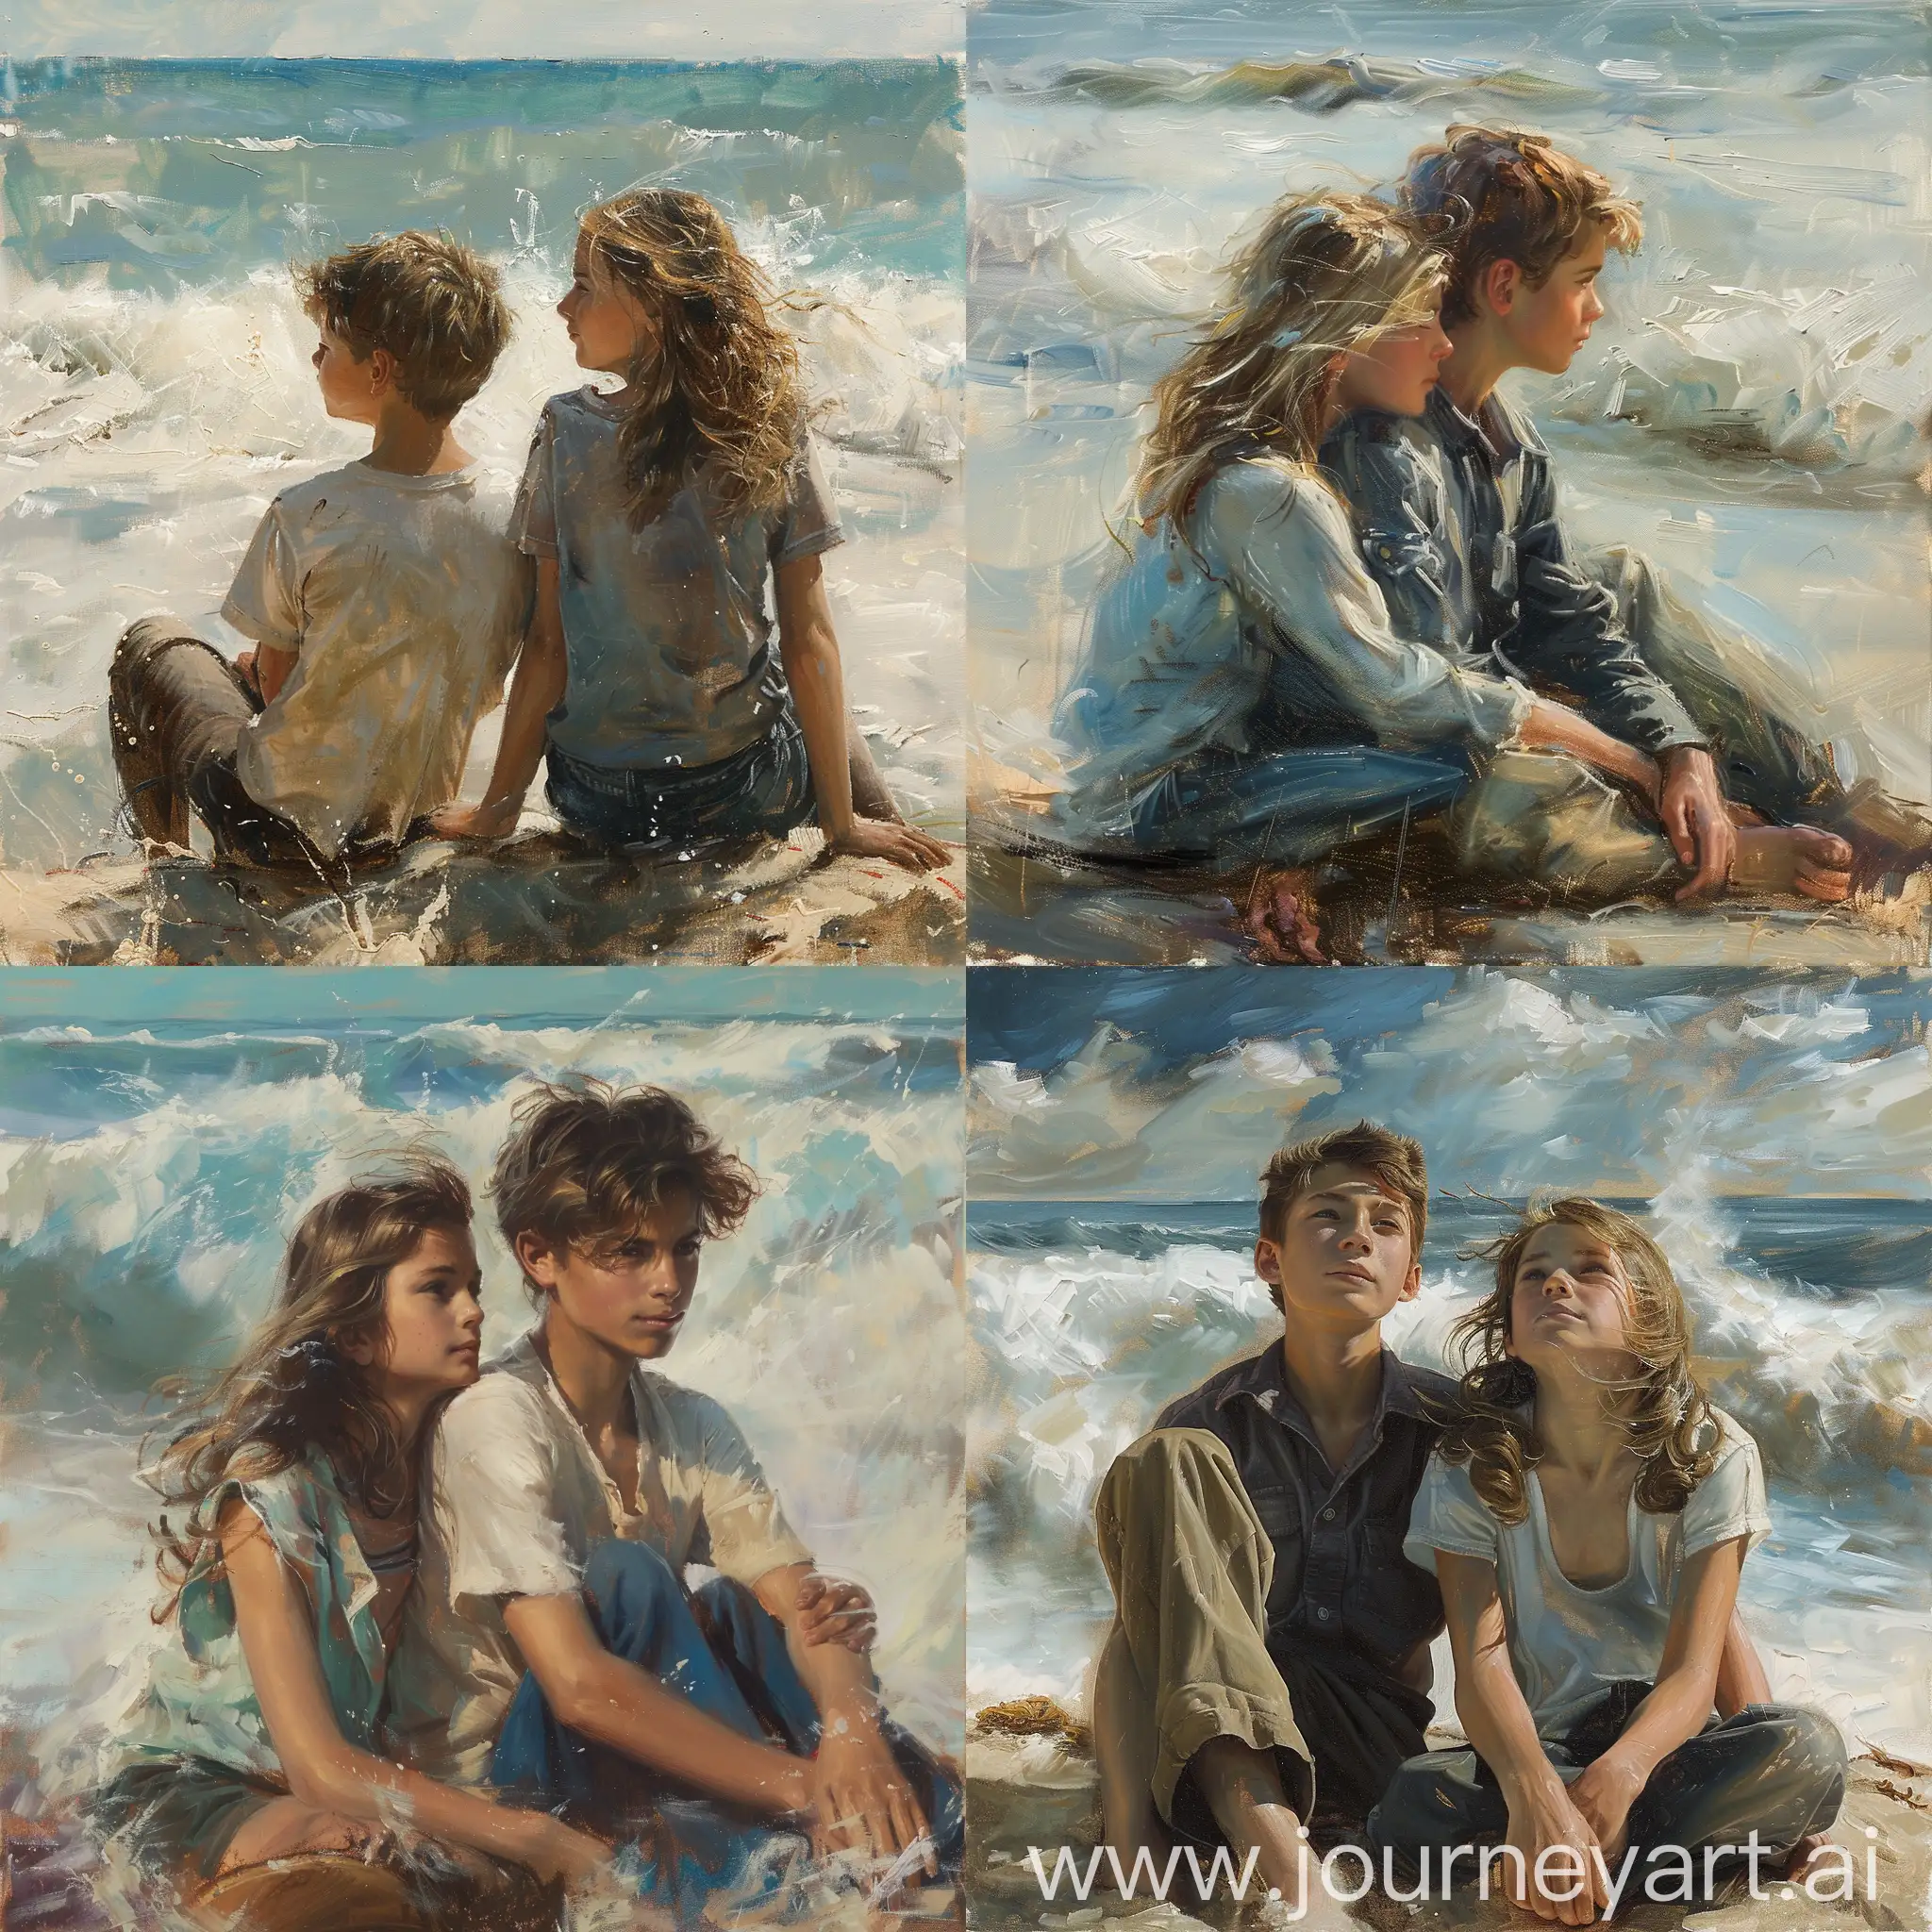 On a windswept beach, a boy and a girl sit side by side, their faces angled towards the crashing waves, the salty breeze tousling their hair, their expressions a mix of serenity and joy, as they share a quiet moment together, Painting, oil on canvas, employing a diffused technique to soften the edges and create a sense of movement in the scene,